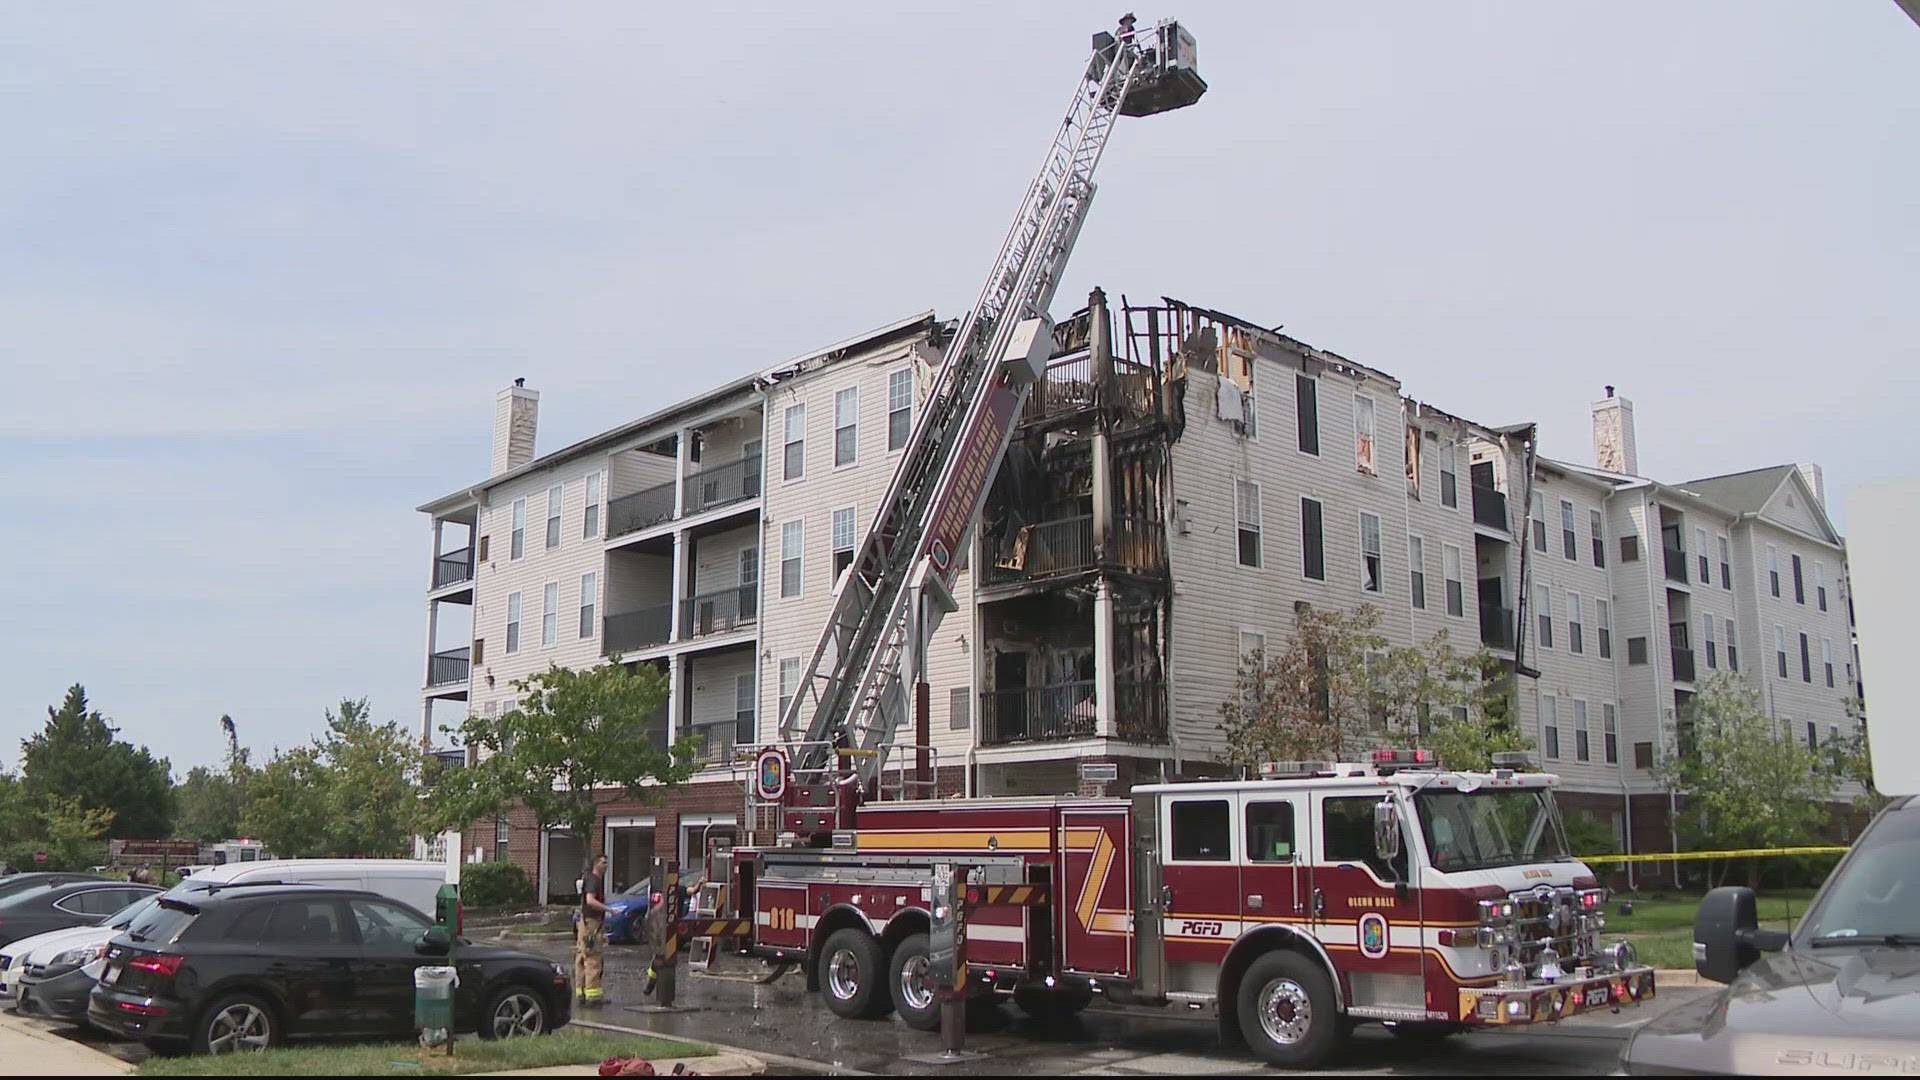 Flames could be seen shooting from the apartment building's roof Monday morning.